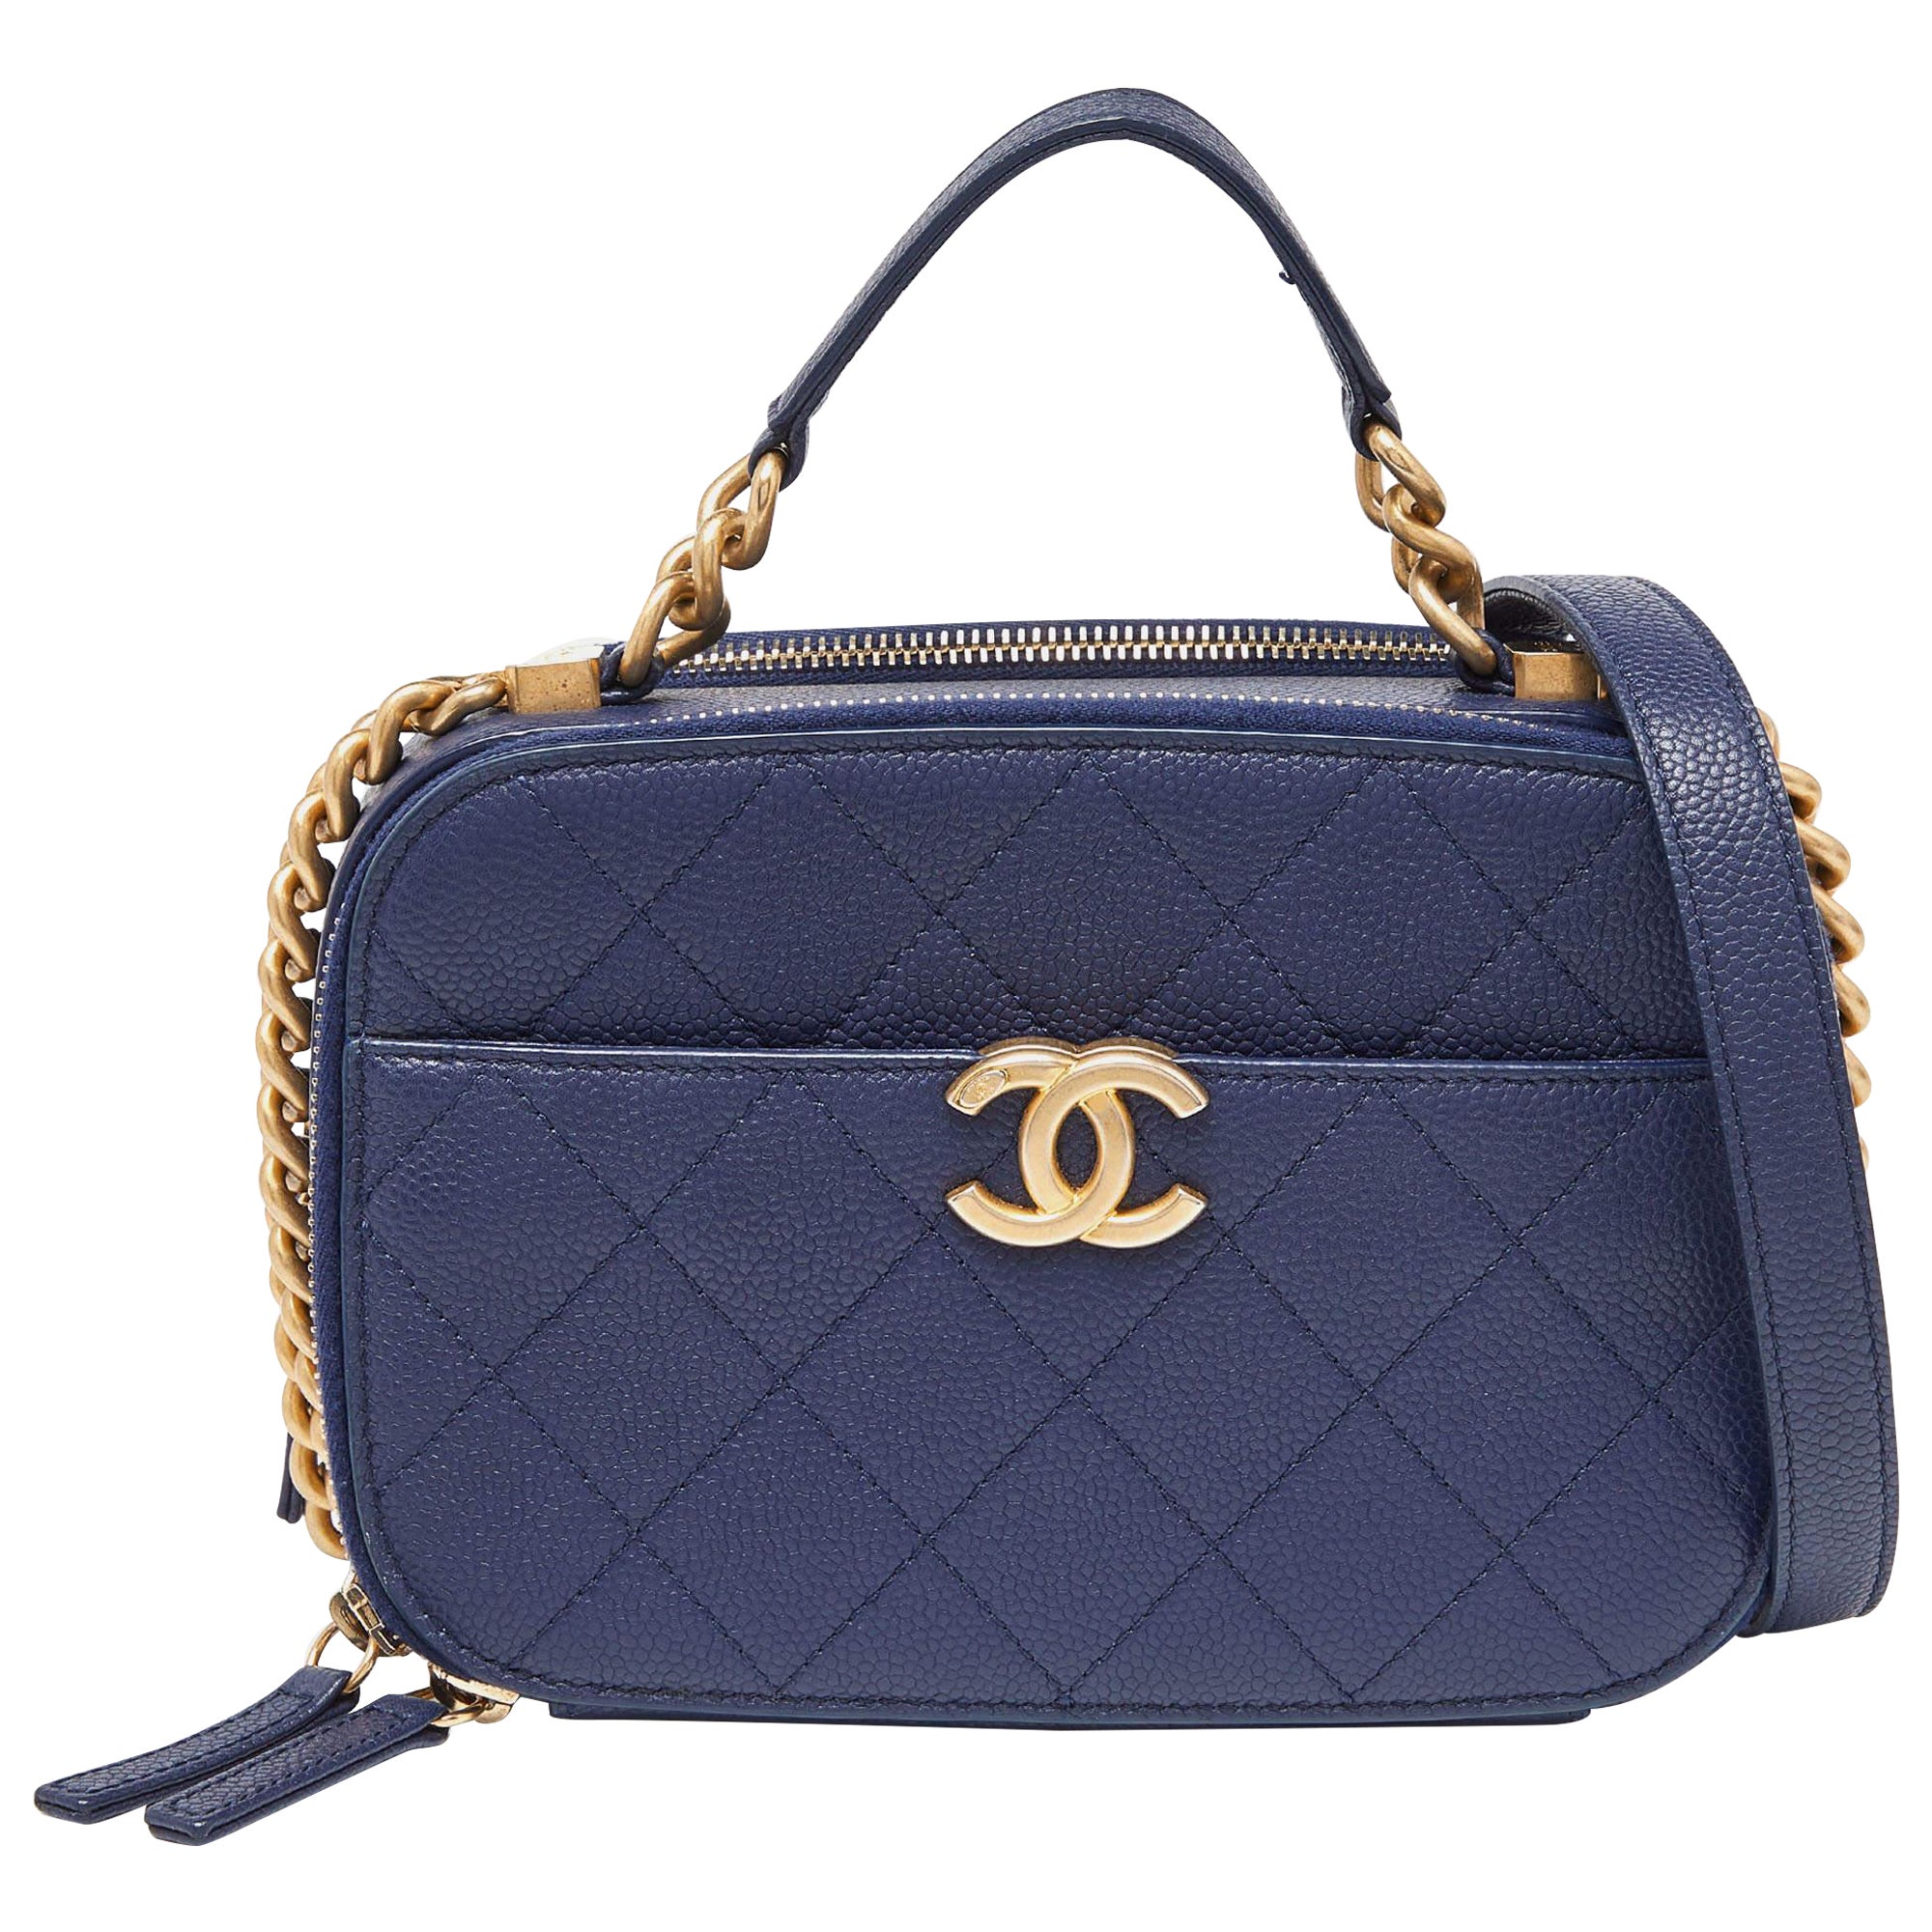 Is the Chanel logo gold-plated?